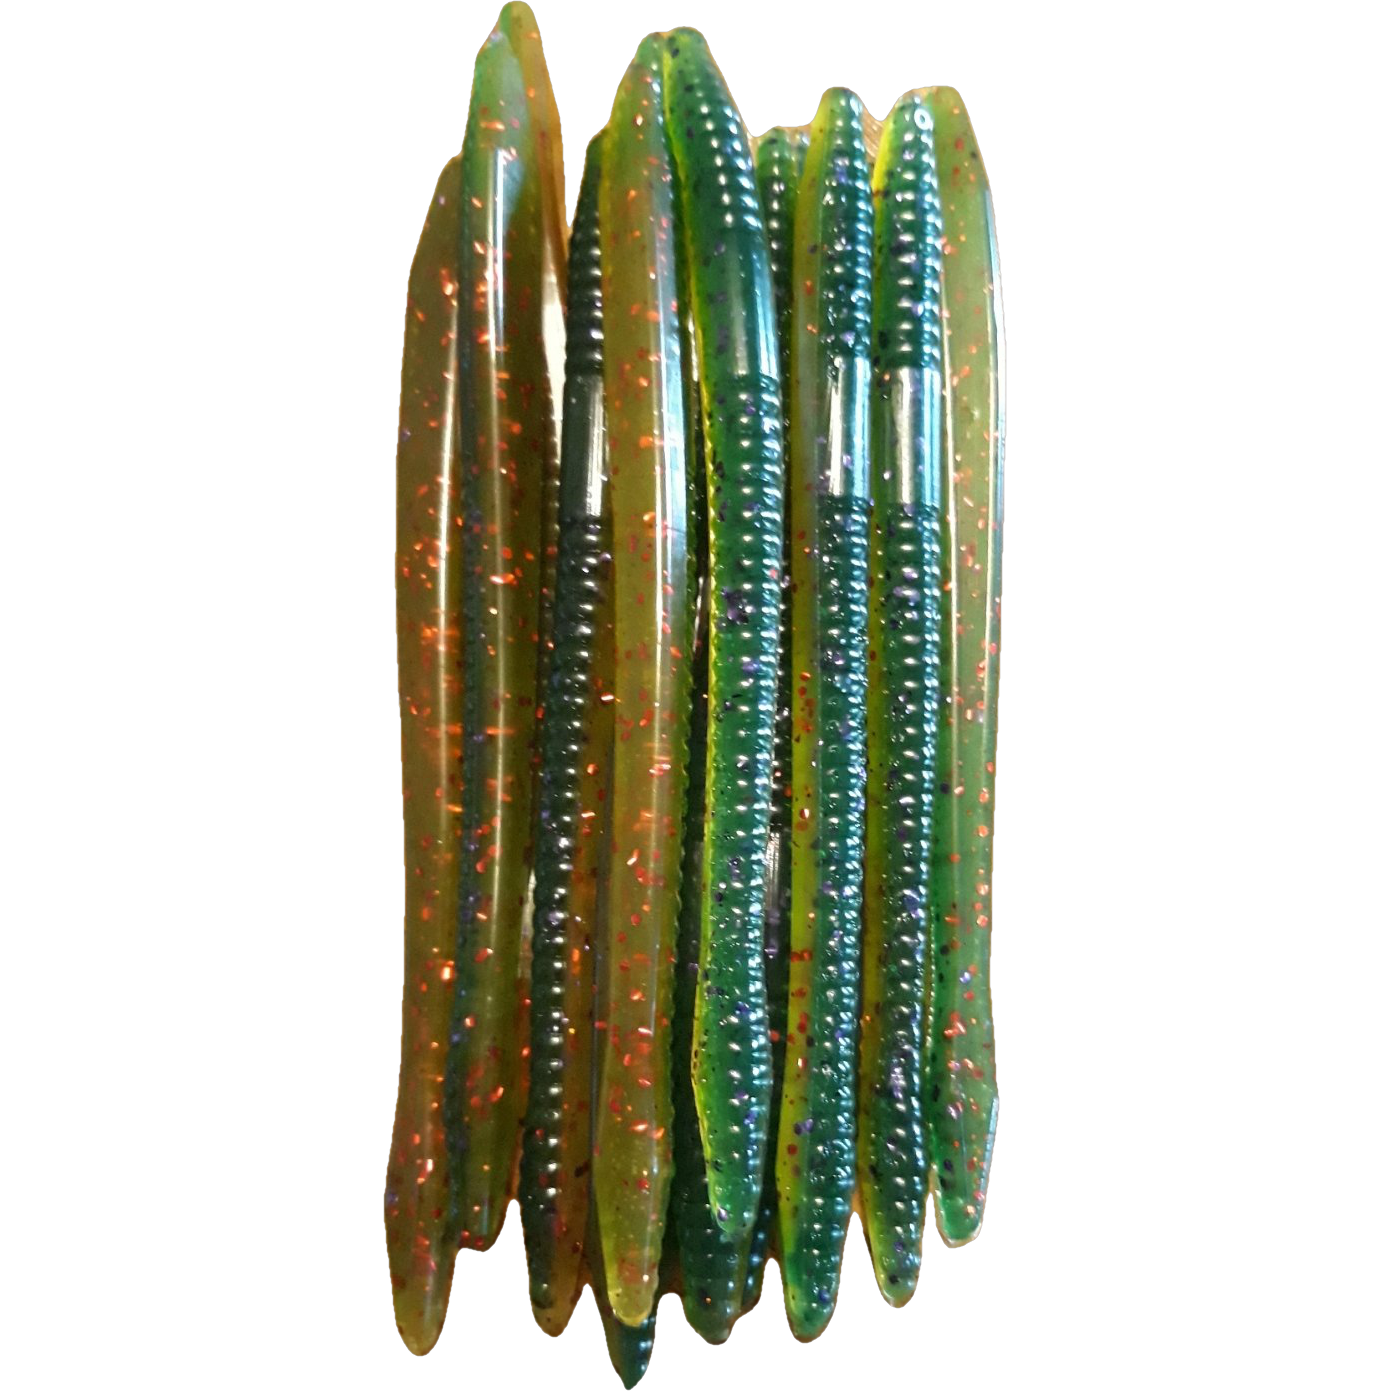 4.75 Trick Worms in Bulk - Butchers Baits